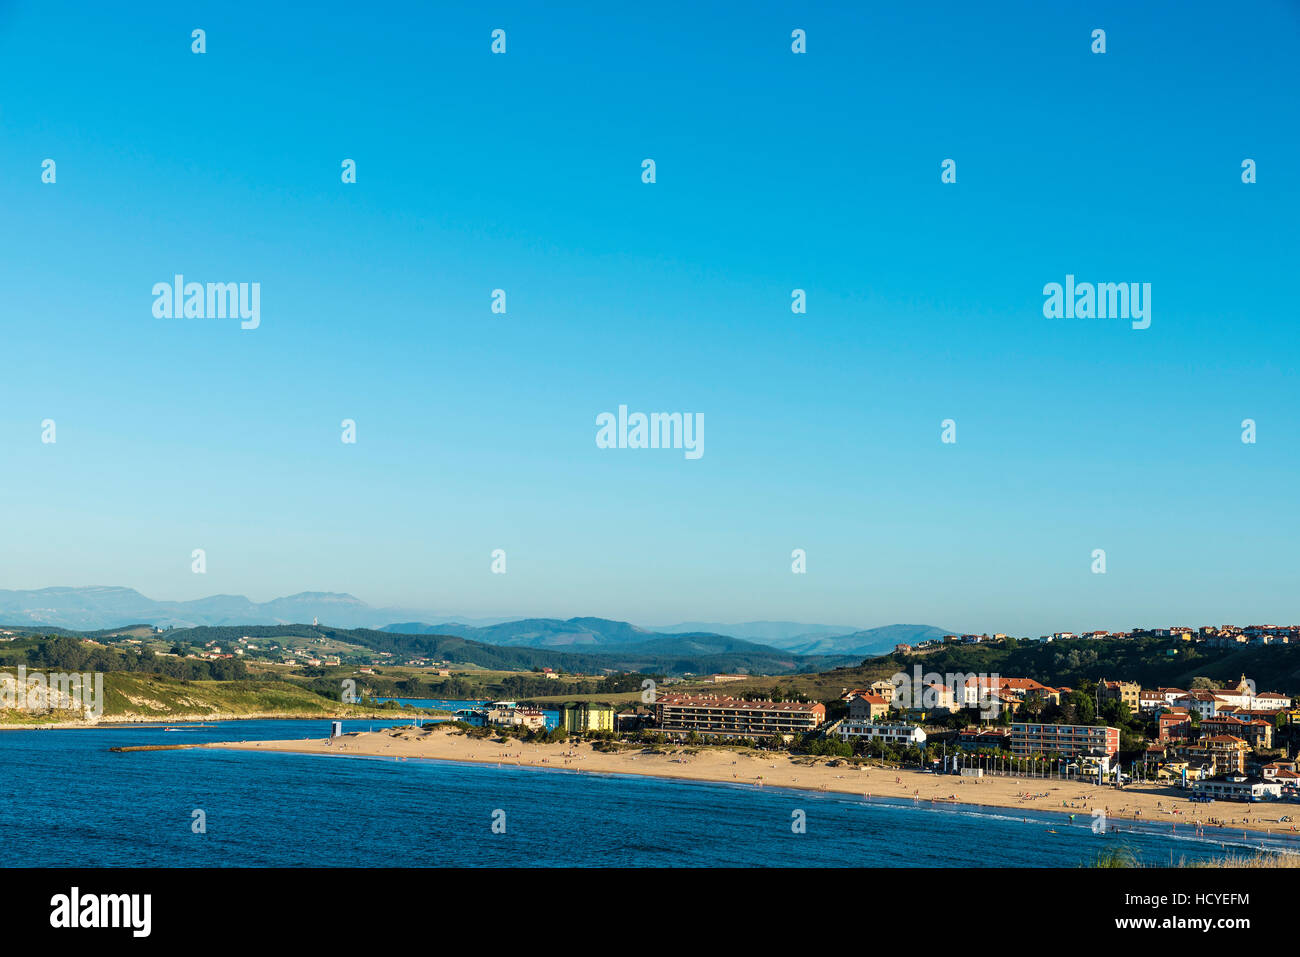 Suances beach with people bathing in the Atlantic Ocean in Cantabria, Spain Stock Photo